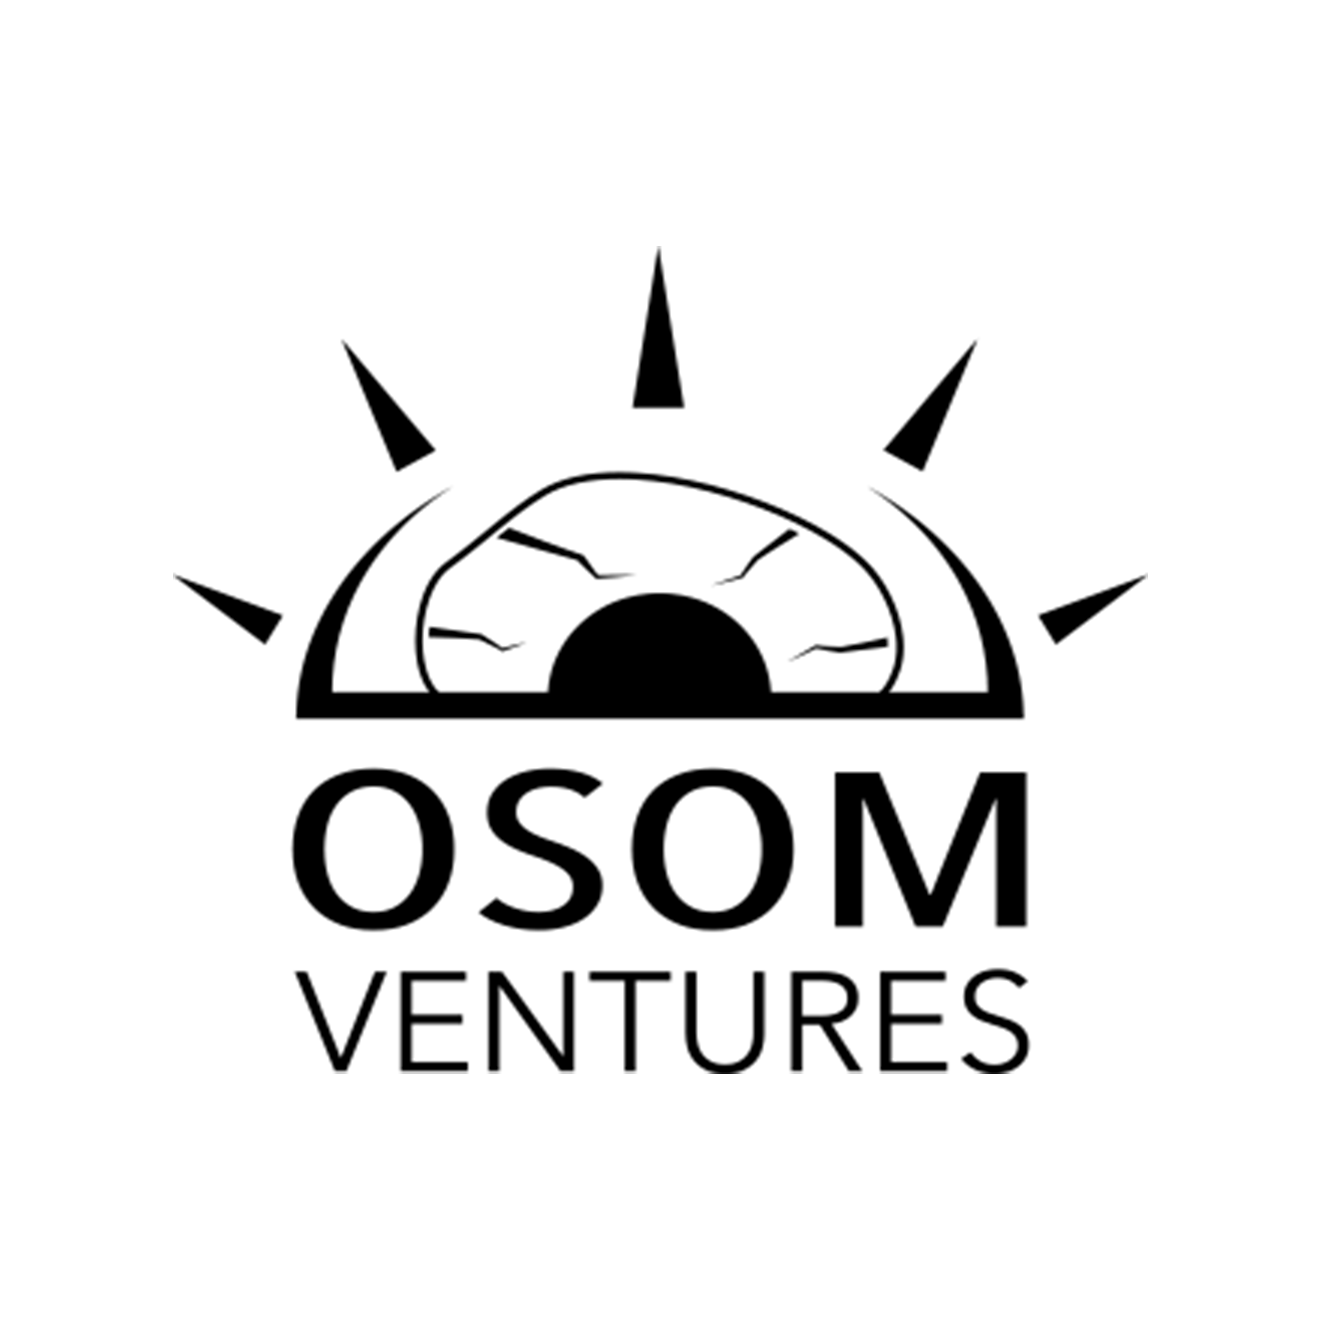  OSOM Ventures is a conscious-driven, grassroots design company focused on sharing stories and facts of the misrepresented. Our mission is to create products and content that shed light on the importance of building self-sustaining communities global